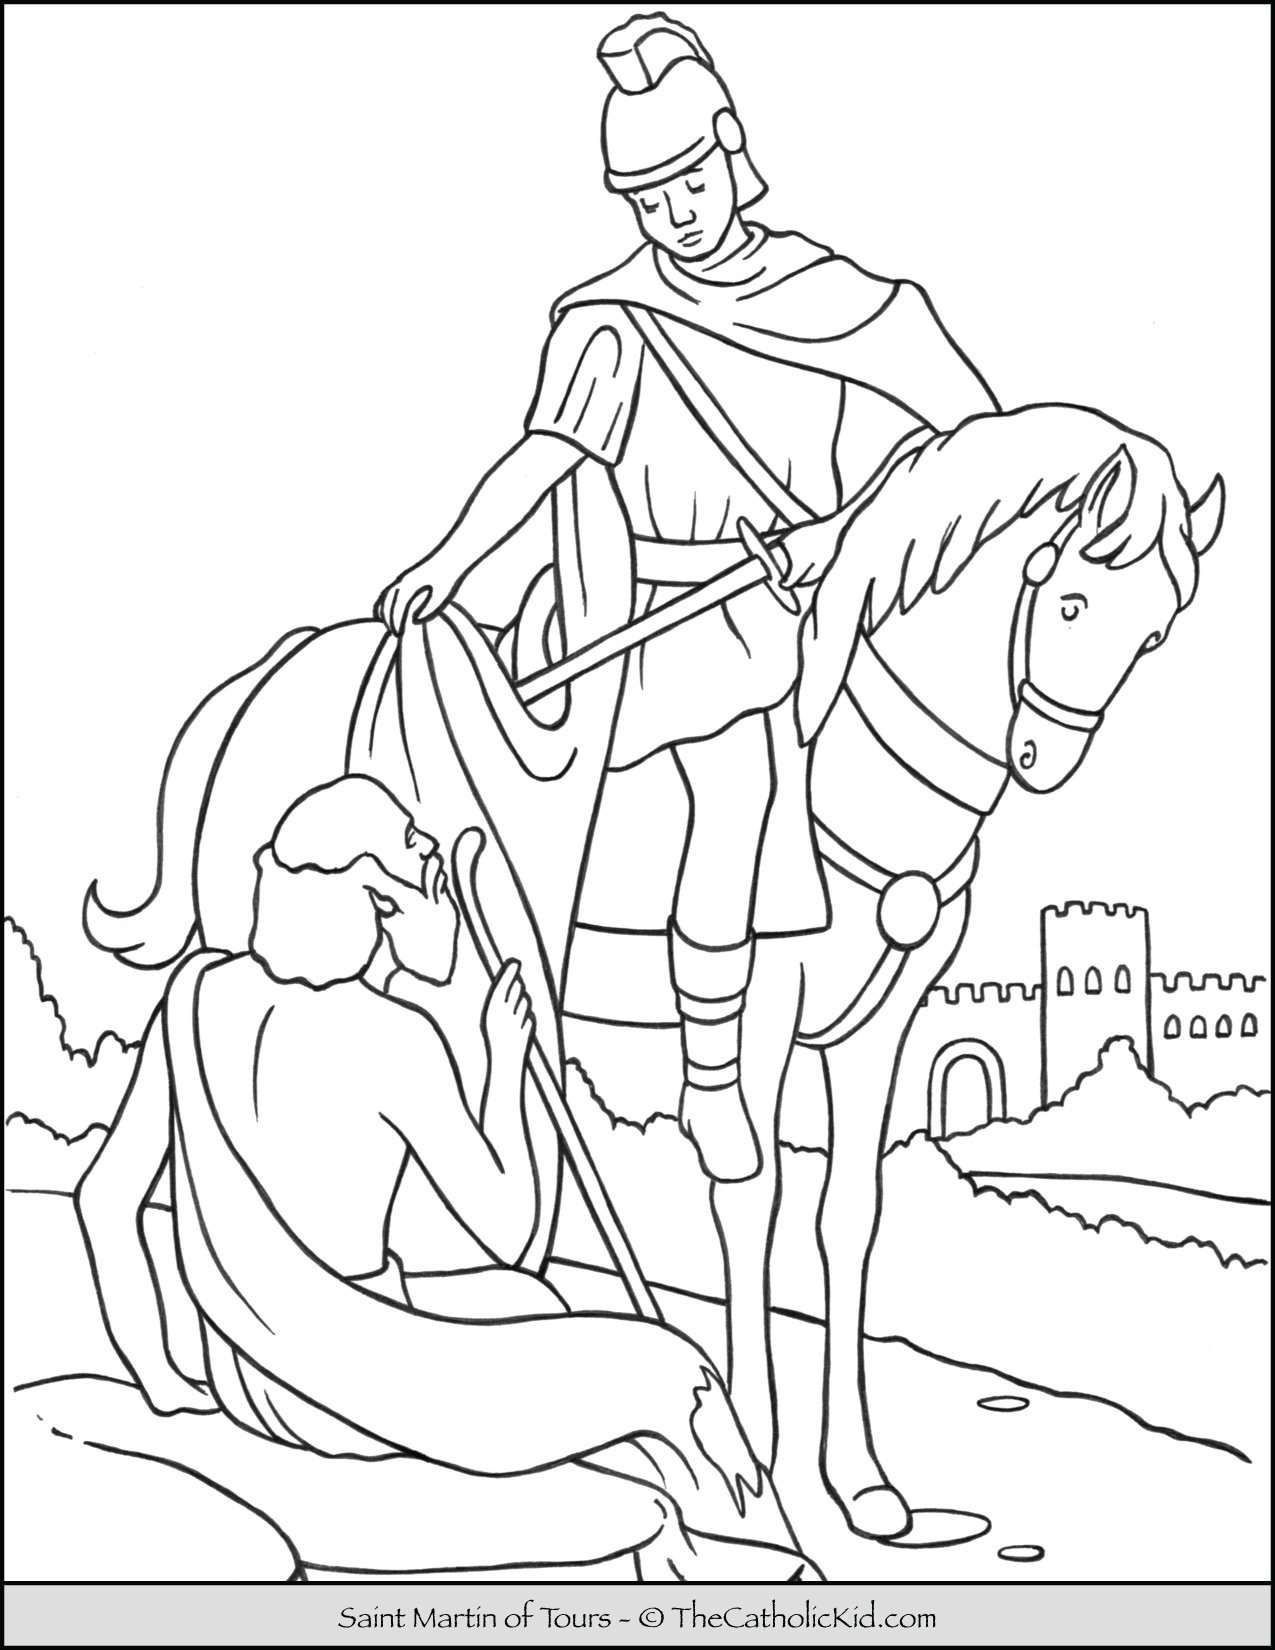 Saint martin of tours coloring page